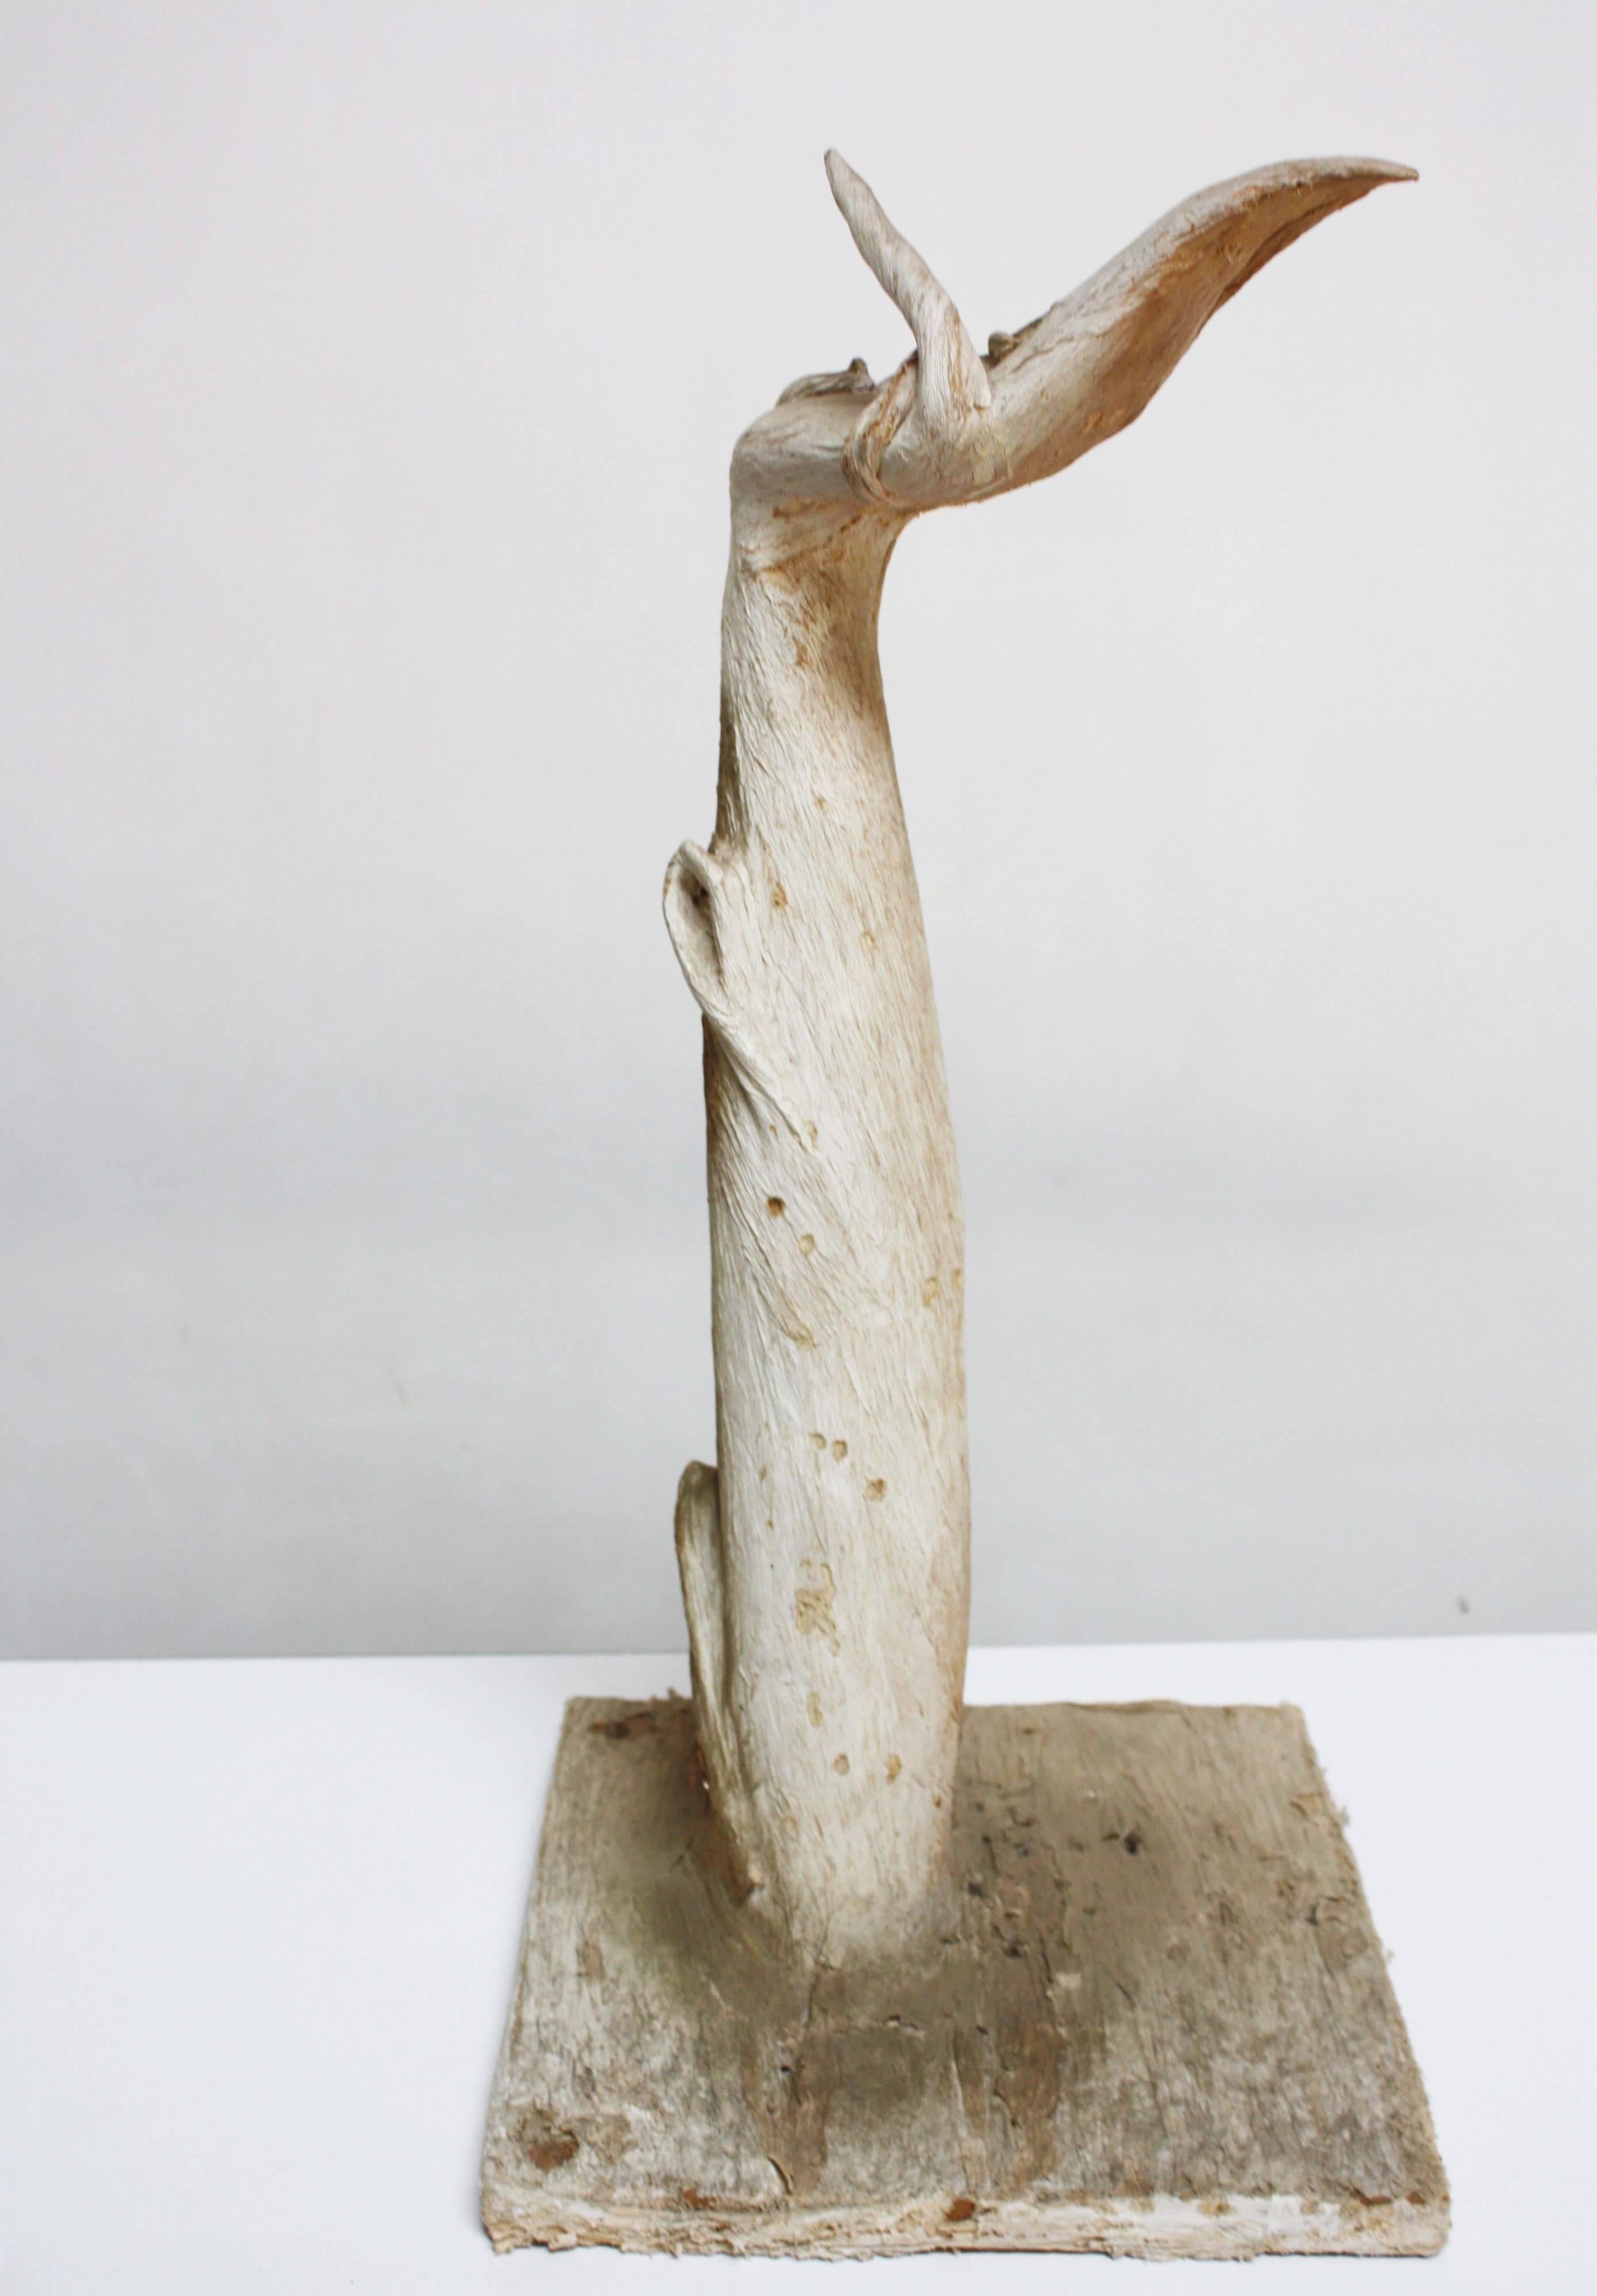 Primitive Petrified and Painted Tree Branch 'Hand' Sculpture on Board